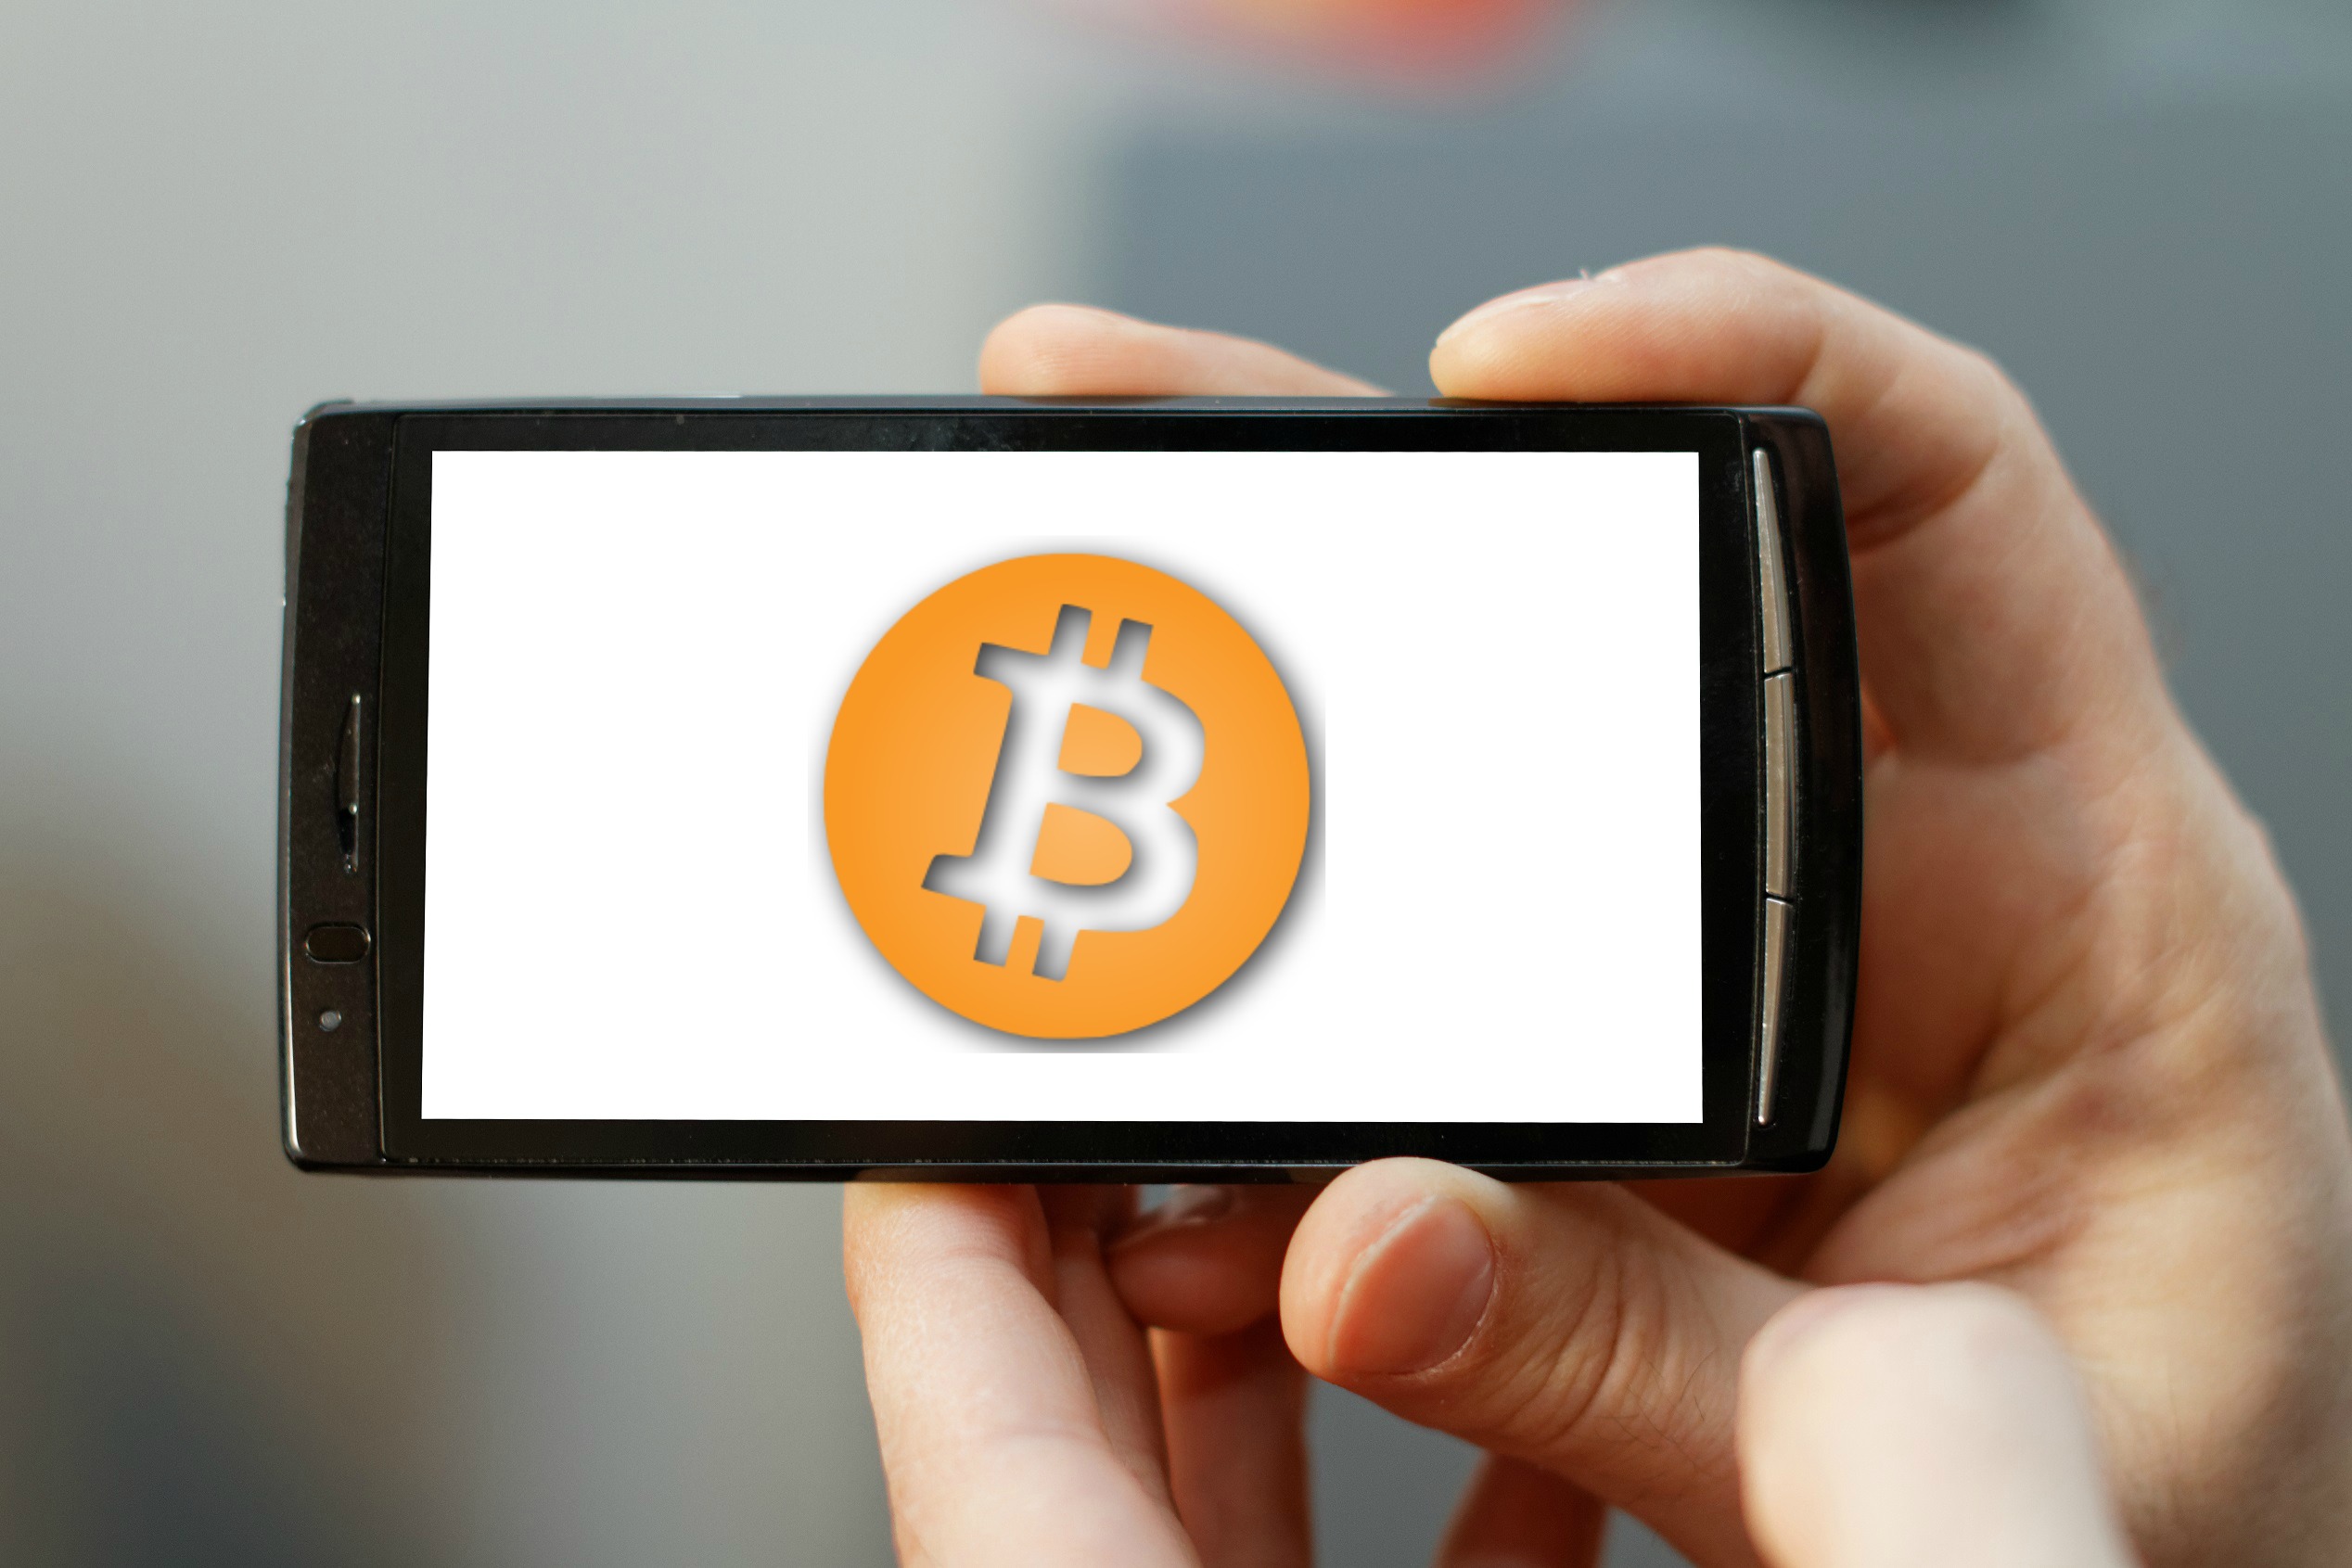 is it possible to mine bitcoin on a phone